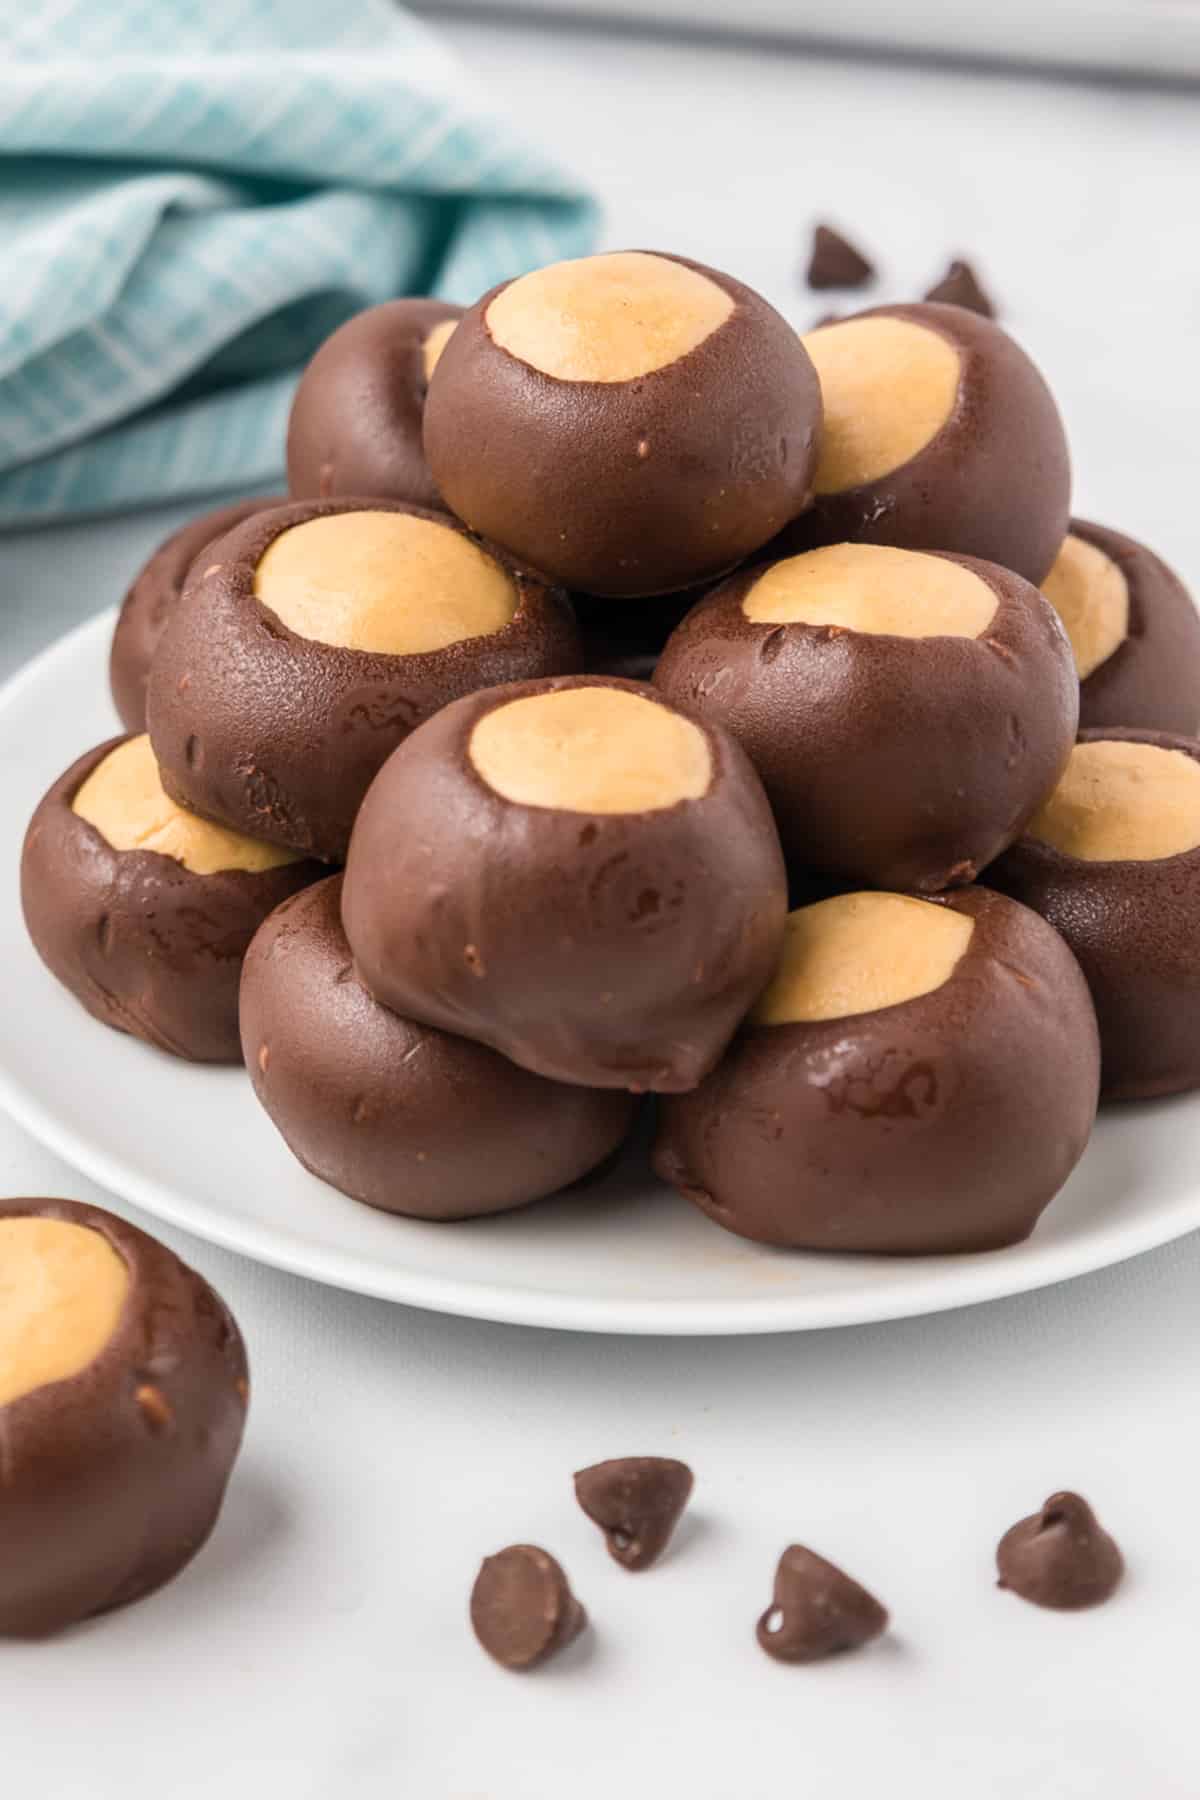 Buckeyes stacked high on a plate from the side on a kitchen counter.